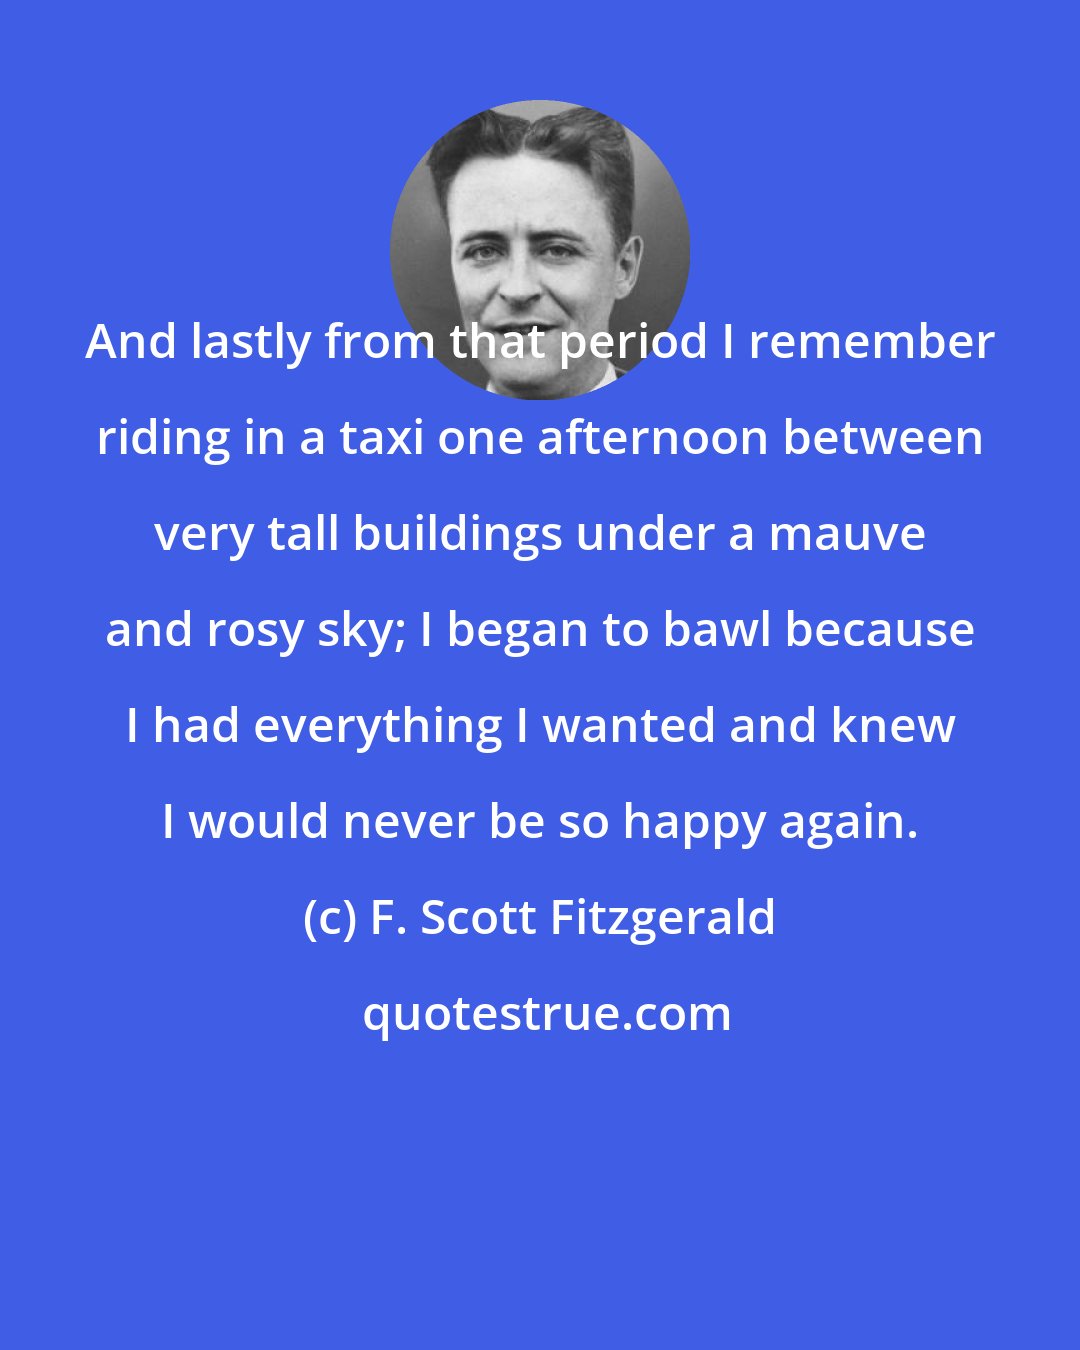 F. Scott Fitzgerald: And lastly from that period I remember riding in a taxi one afternoon between very tall buildings under a mauve and rosy sky; I began to bawl because I had everything I wanted and knew I would never be so happy again.